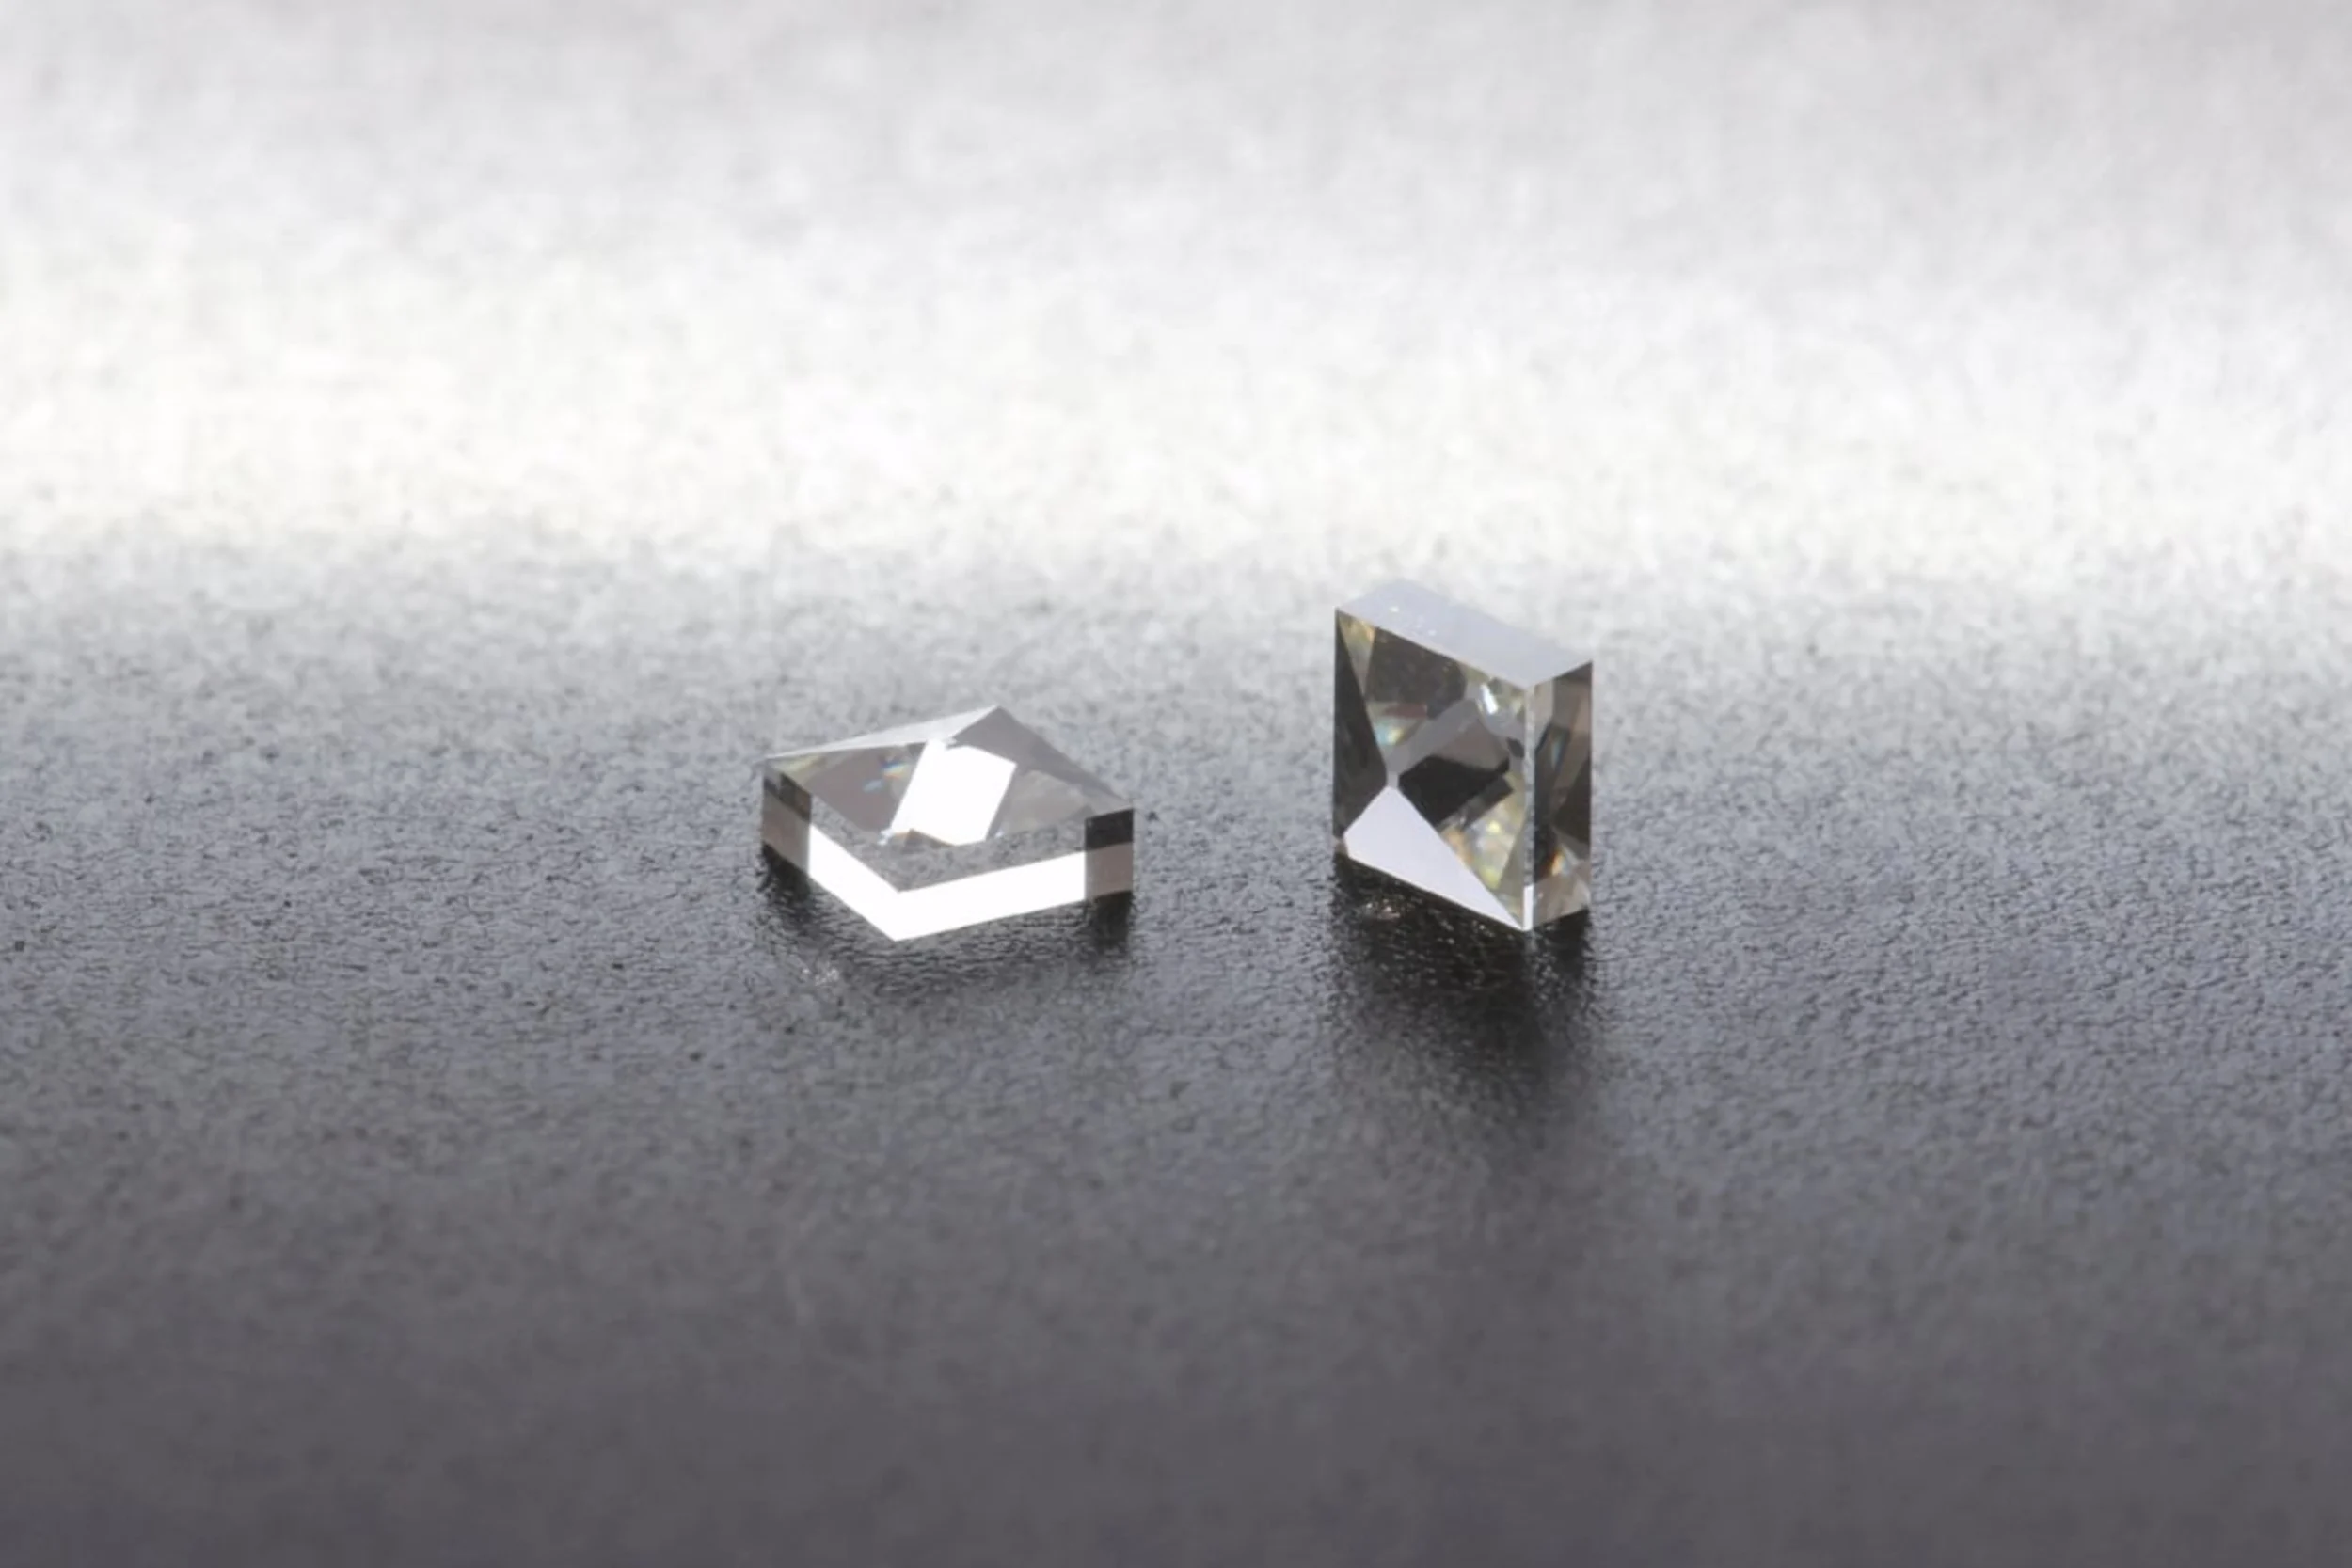 DIFFERENTIATION Between Earth-Extracted Diamonds & Laboratory-Grown Diamonds